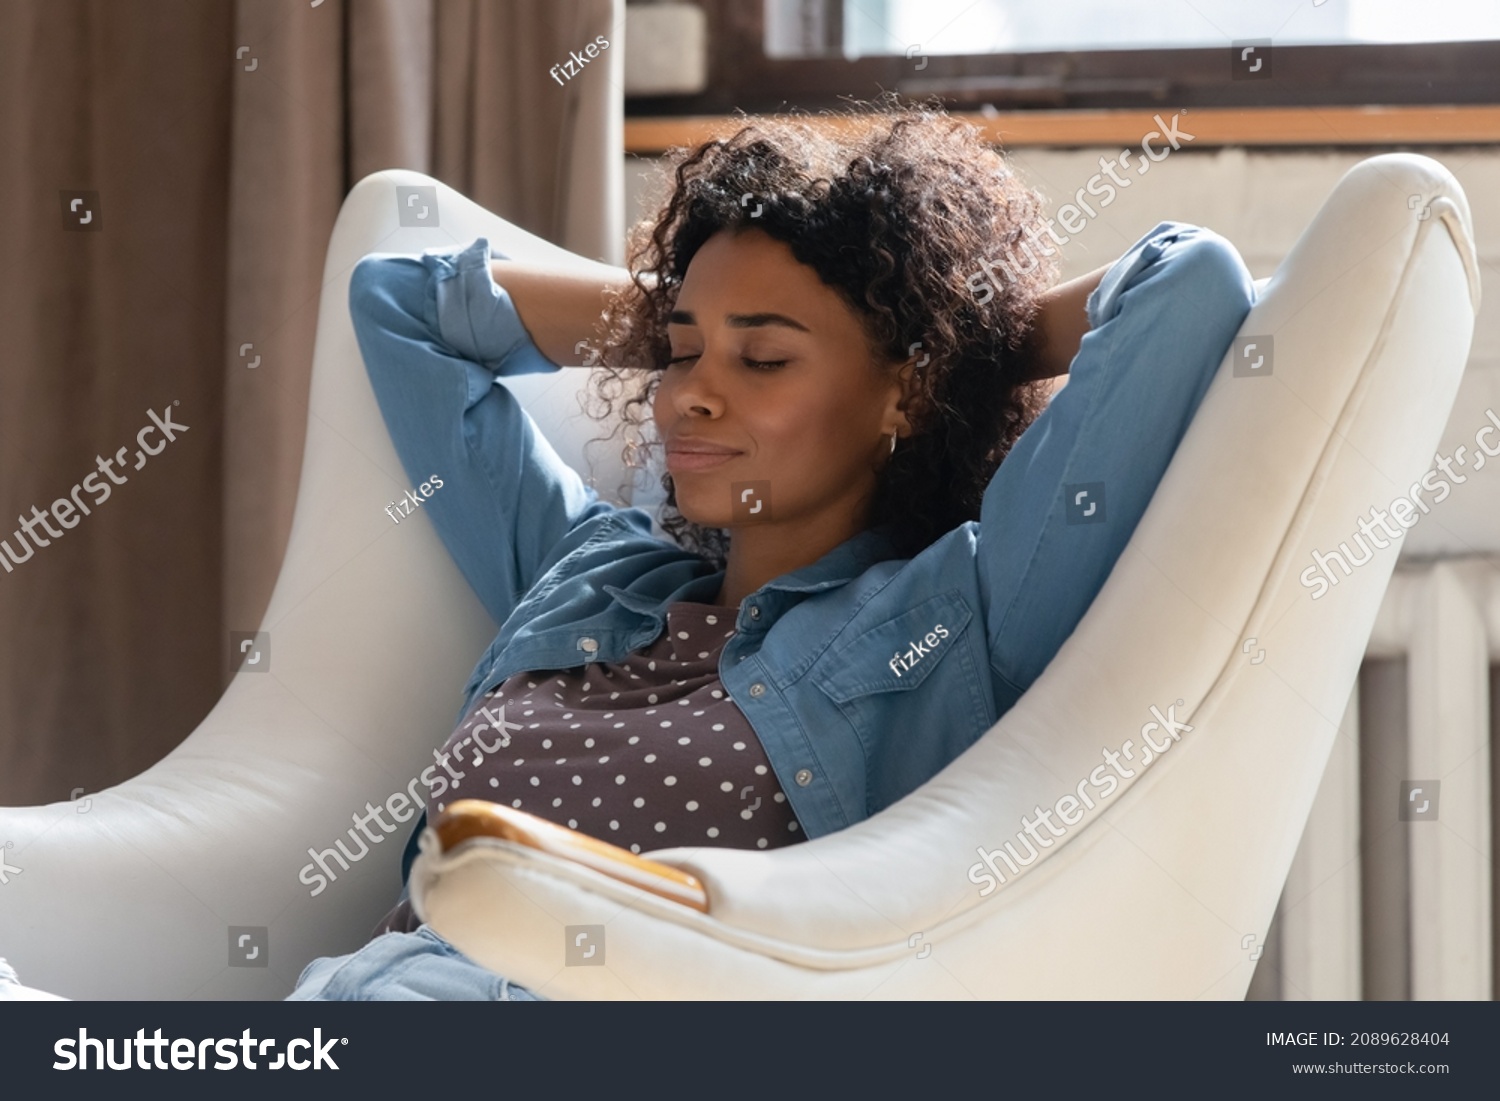 Serene African woman put hands behind head sit on leather armchair relaxing inside modern cozy air-conditioned living room. Climate control, fresh air, no stress weekend, fashionable furniture concept #2089628404